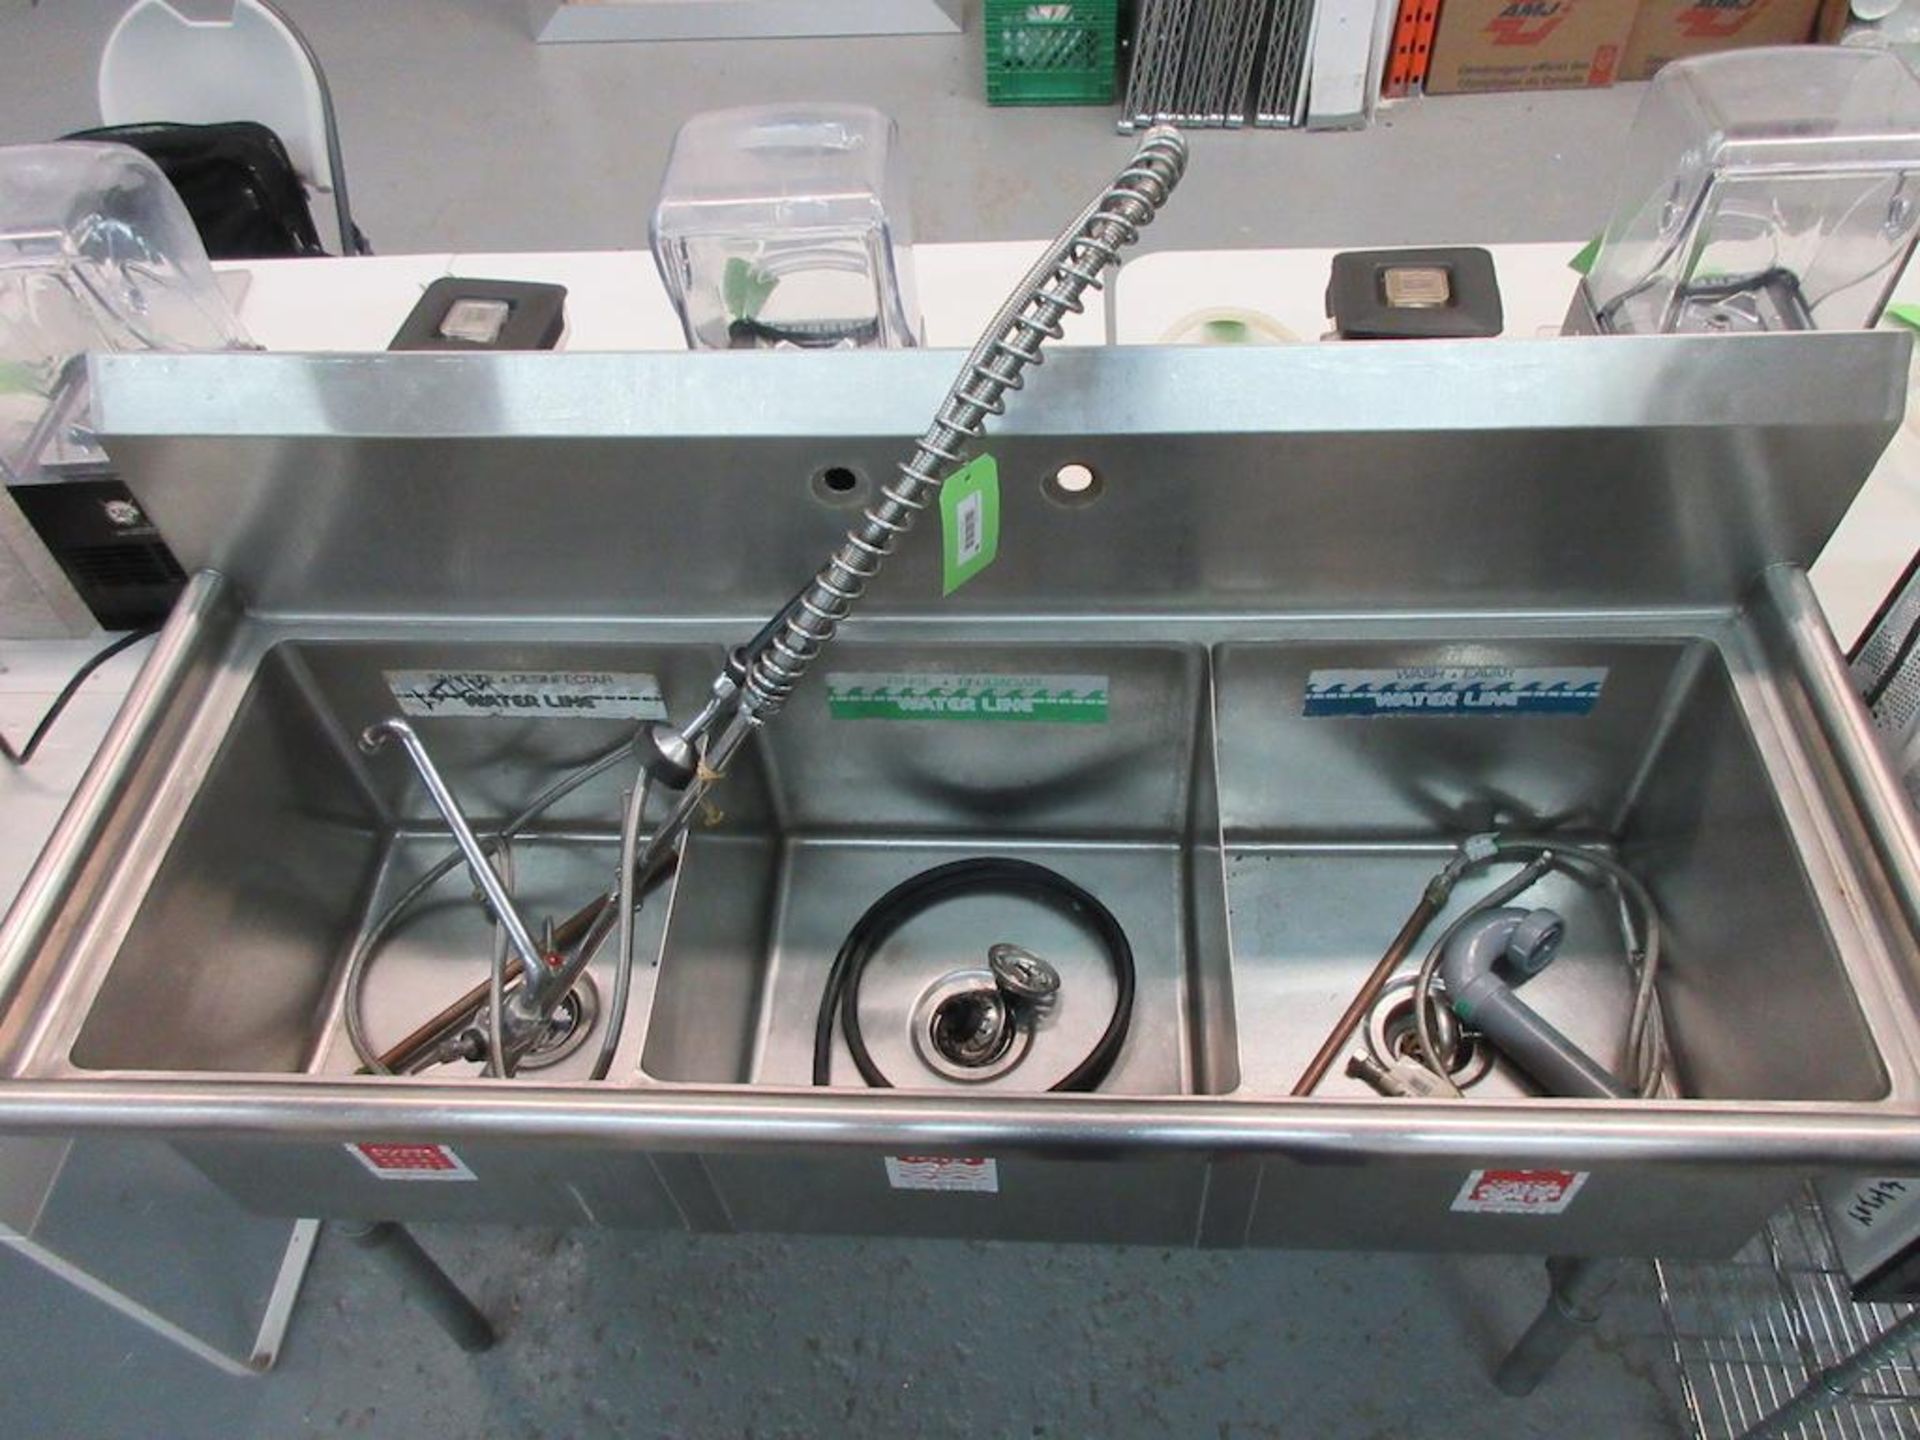 Stainless Steel 59" 3 compartment sink w water filter - Image 3 of 3